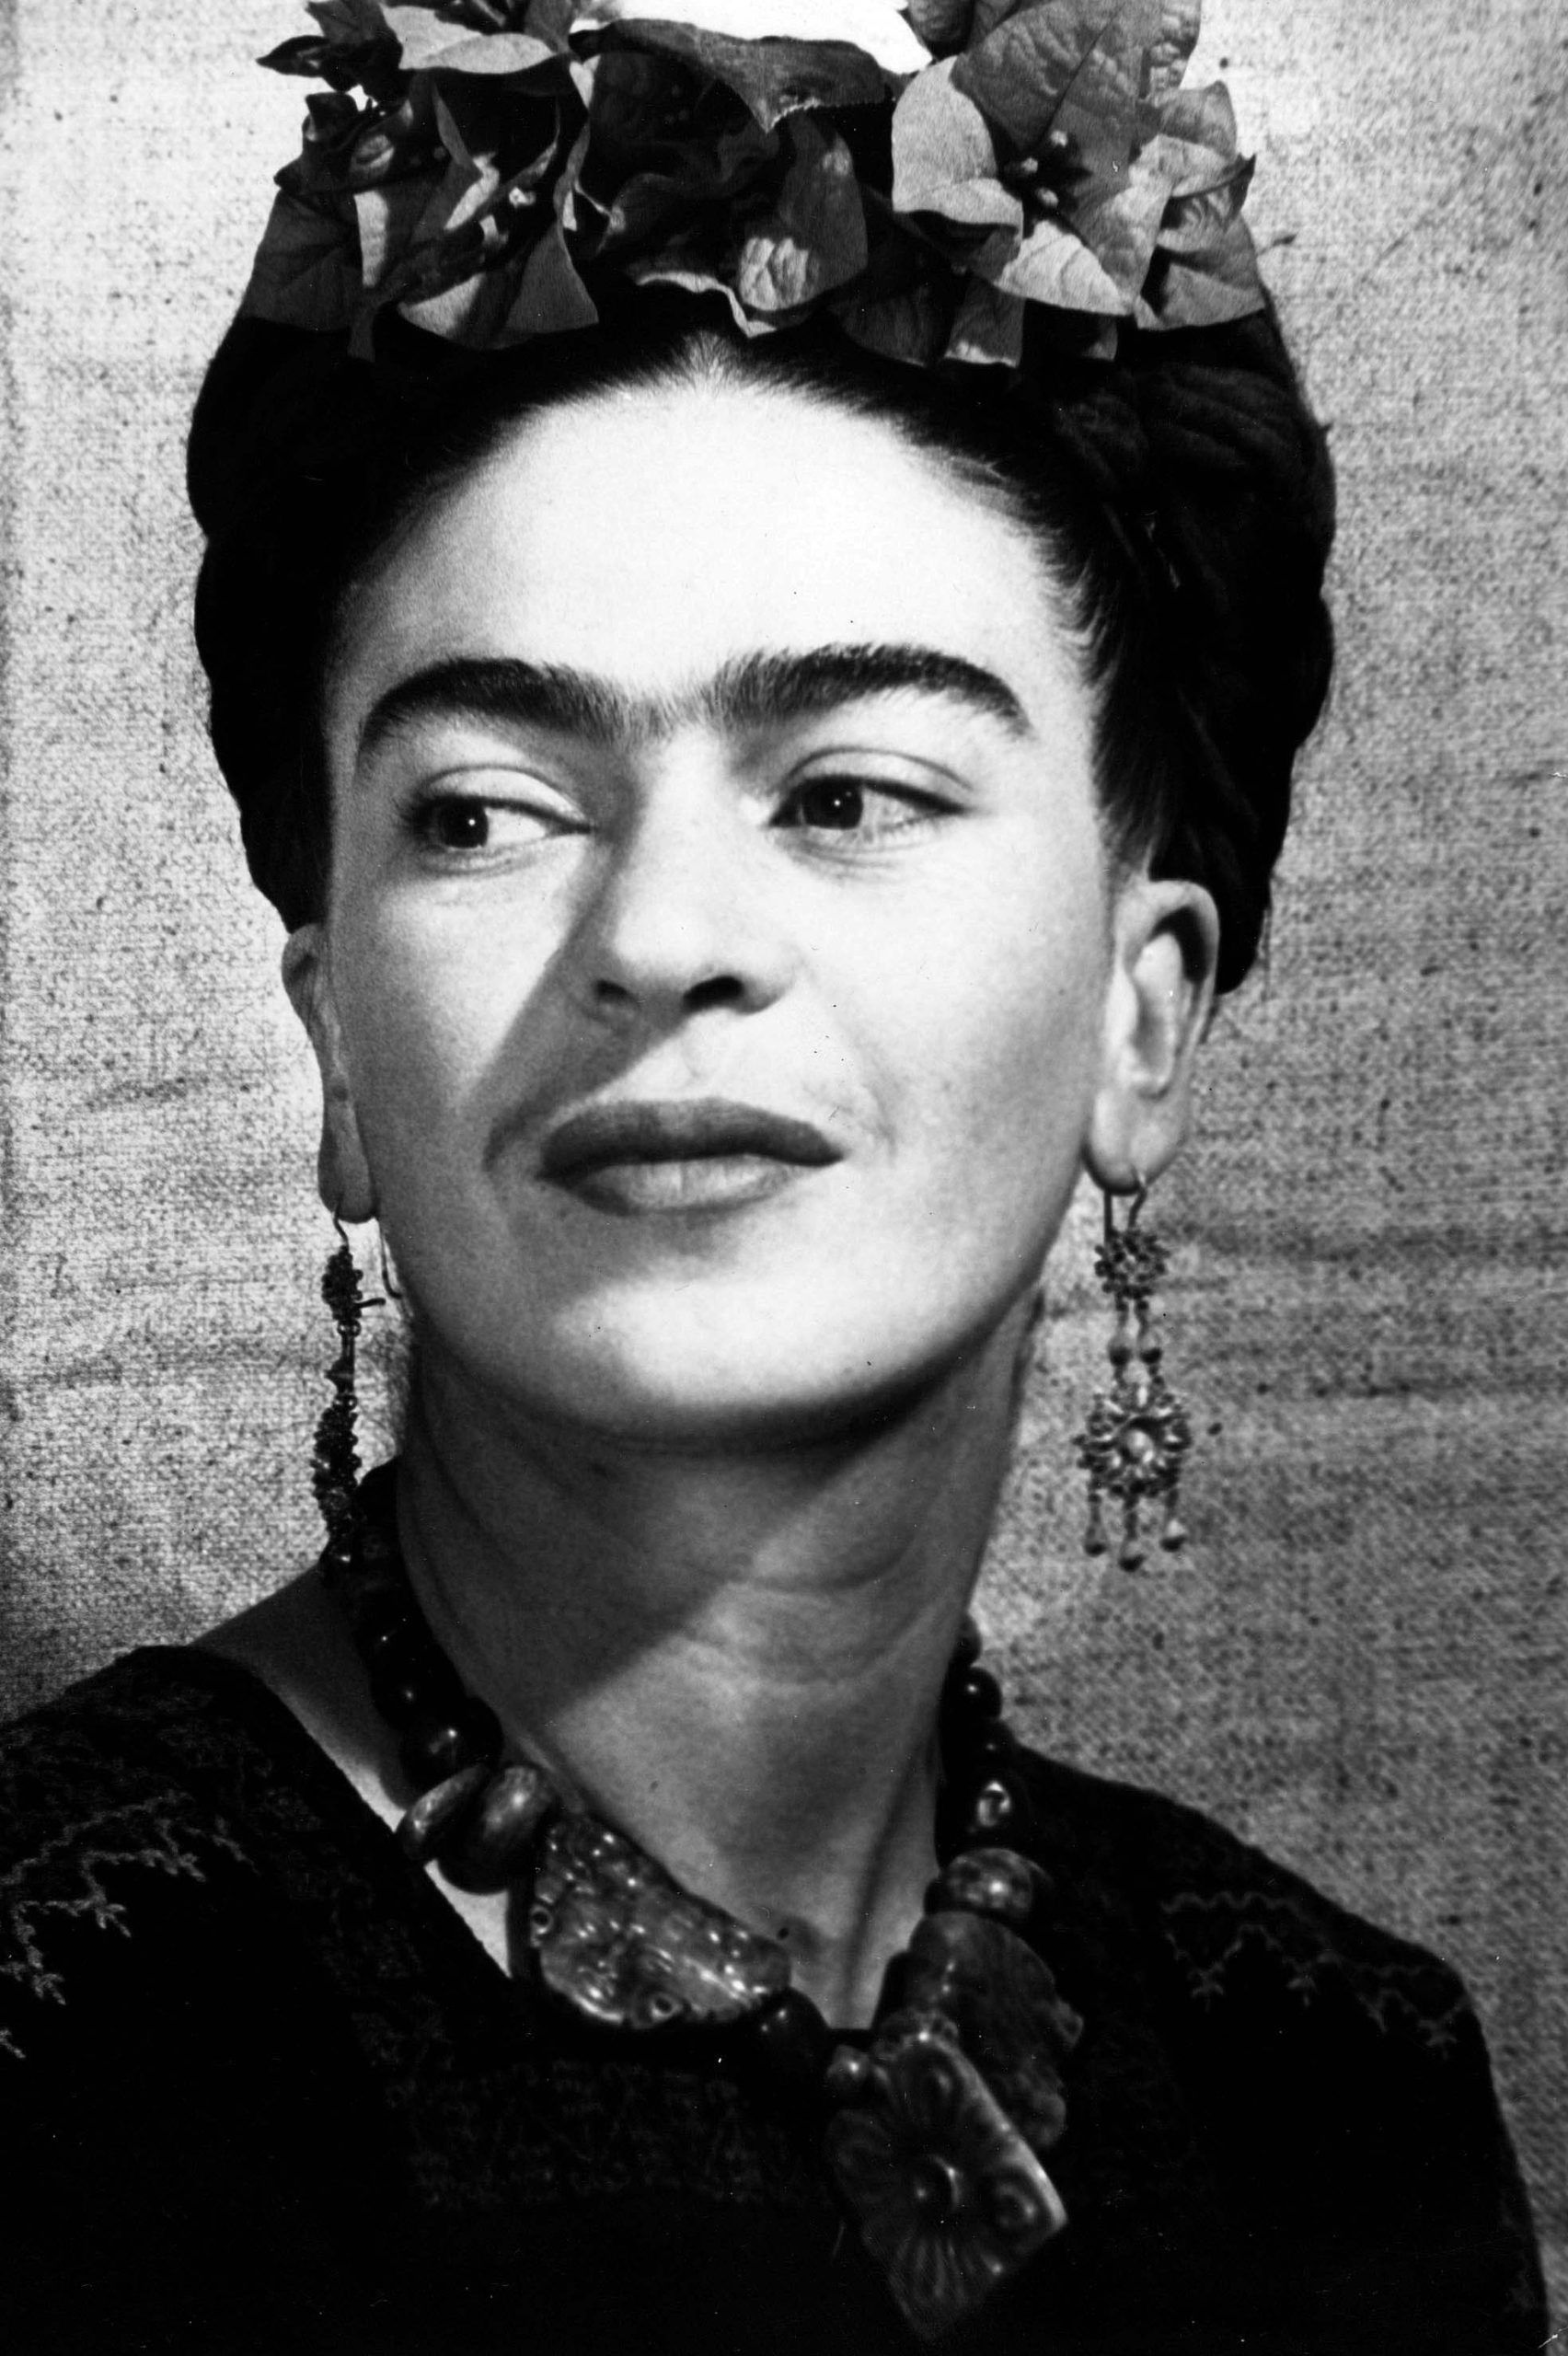 Frida Kahlo was a Mexican painter who is best known for her self-portraits. - Frida Kahlo